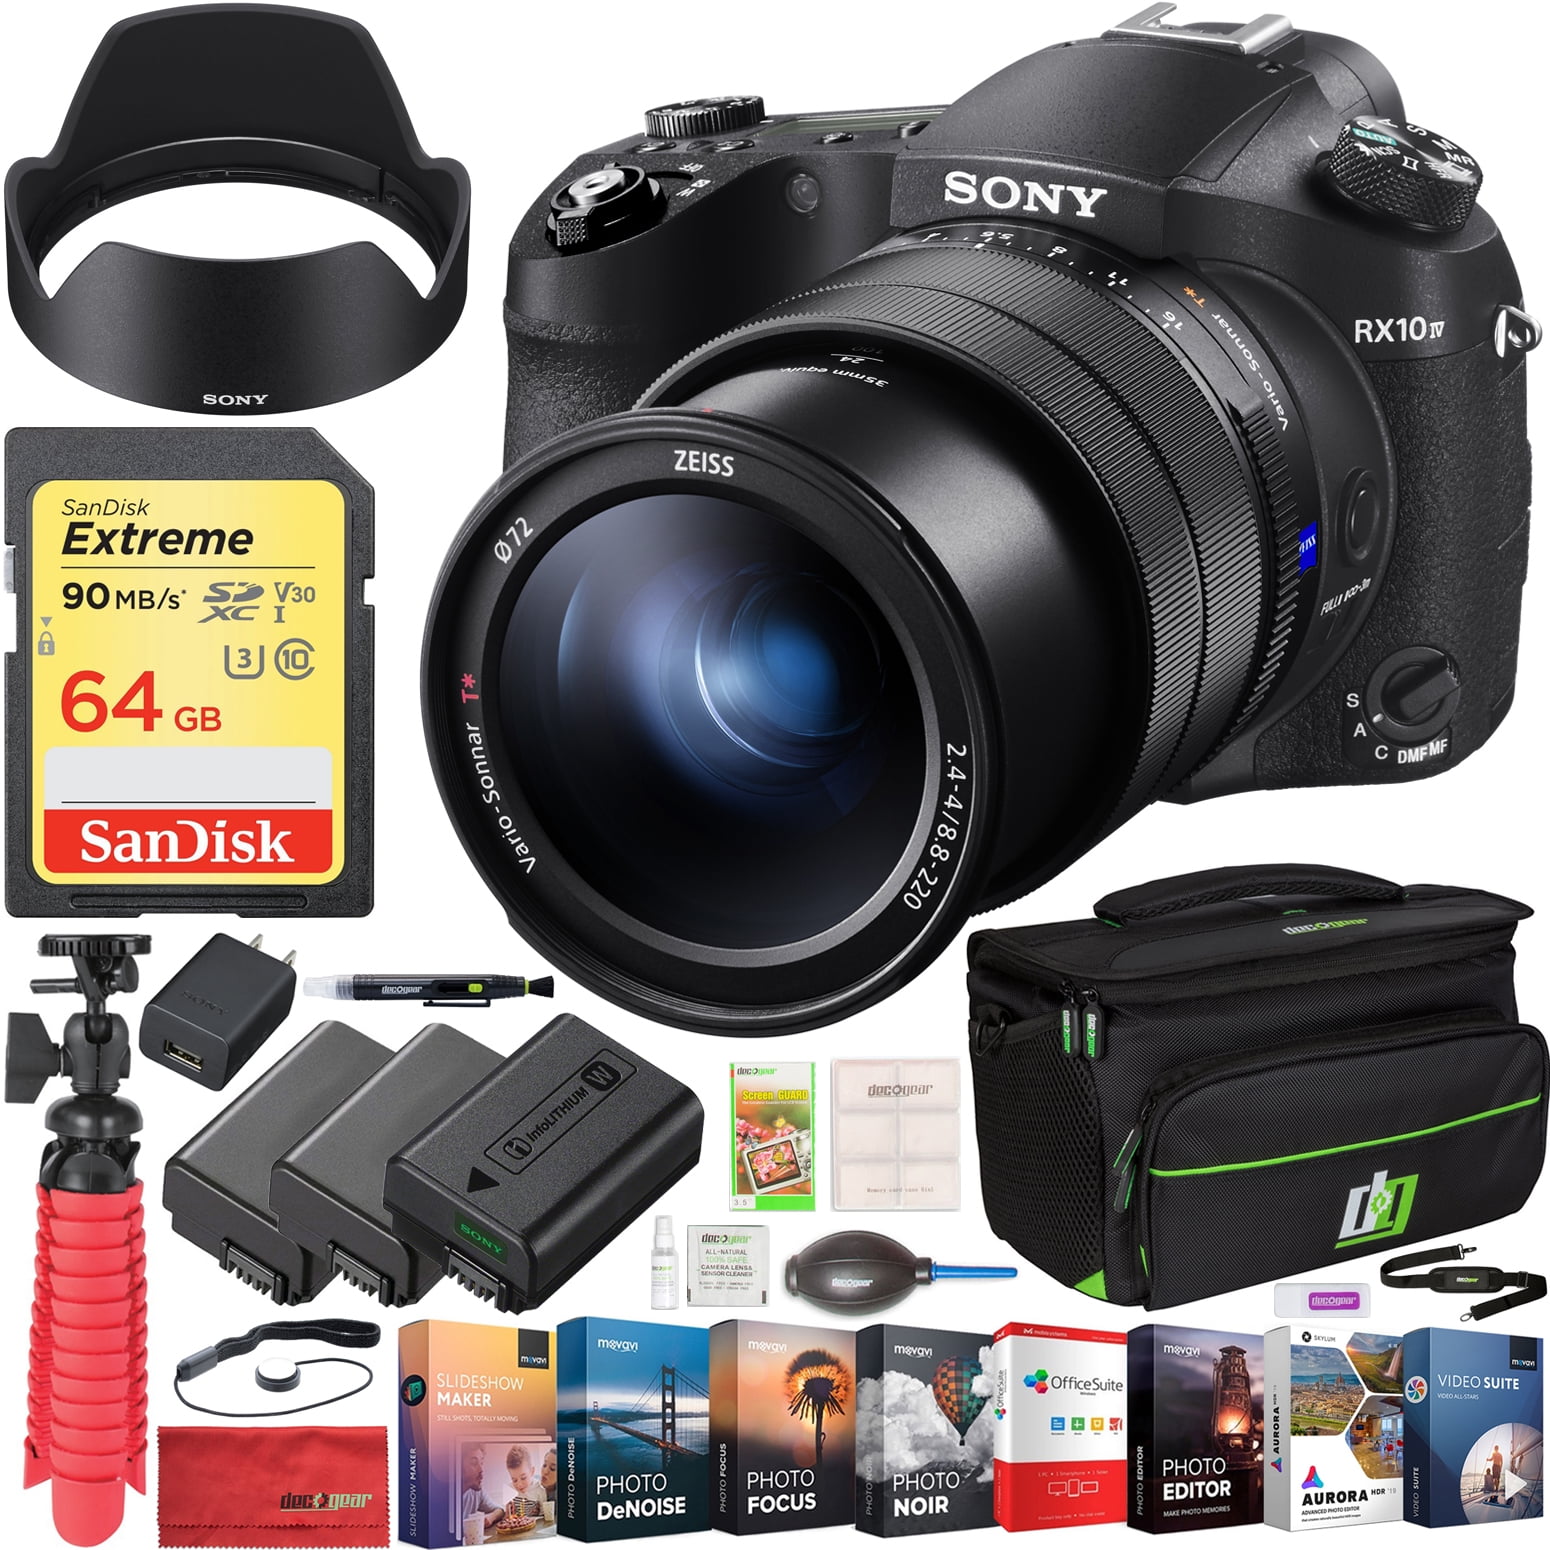 rijkdom herhaling niezen Sony RX10 IV Cyber-Shot High Zoom 20.1MP Camera with 24-600mm F.2.4-F4 lens  Bundle with 64GB memory Card, Camera Bag, 2x Battery and Photo and Video  Professional Editing Suite - Walmart.com